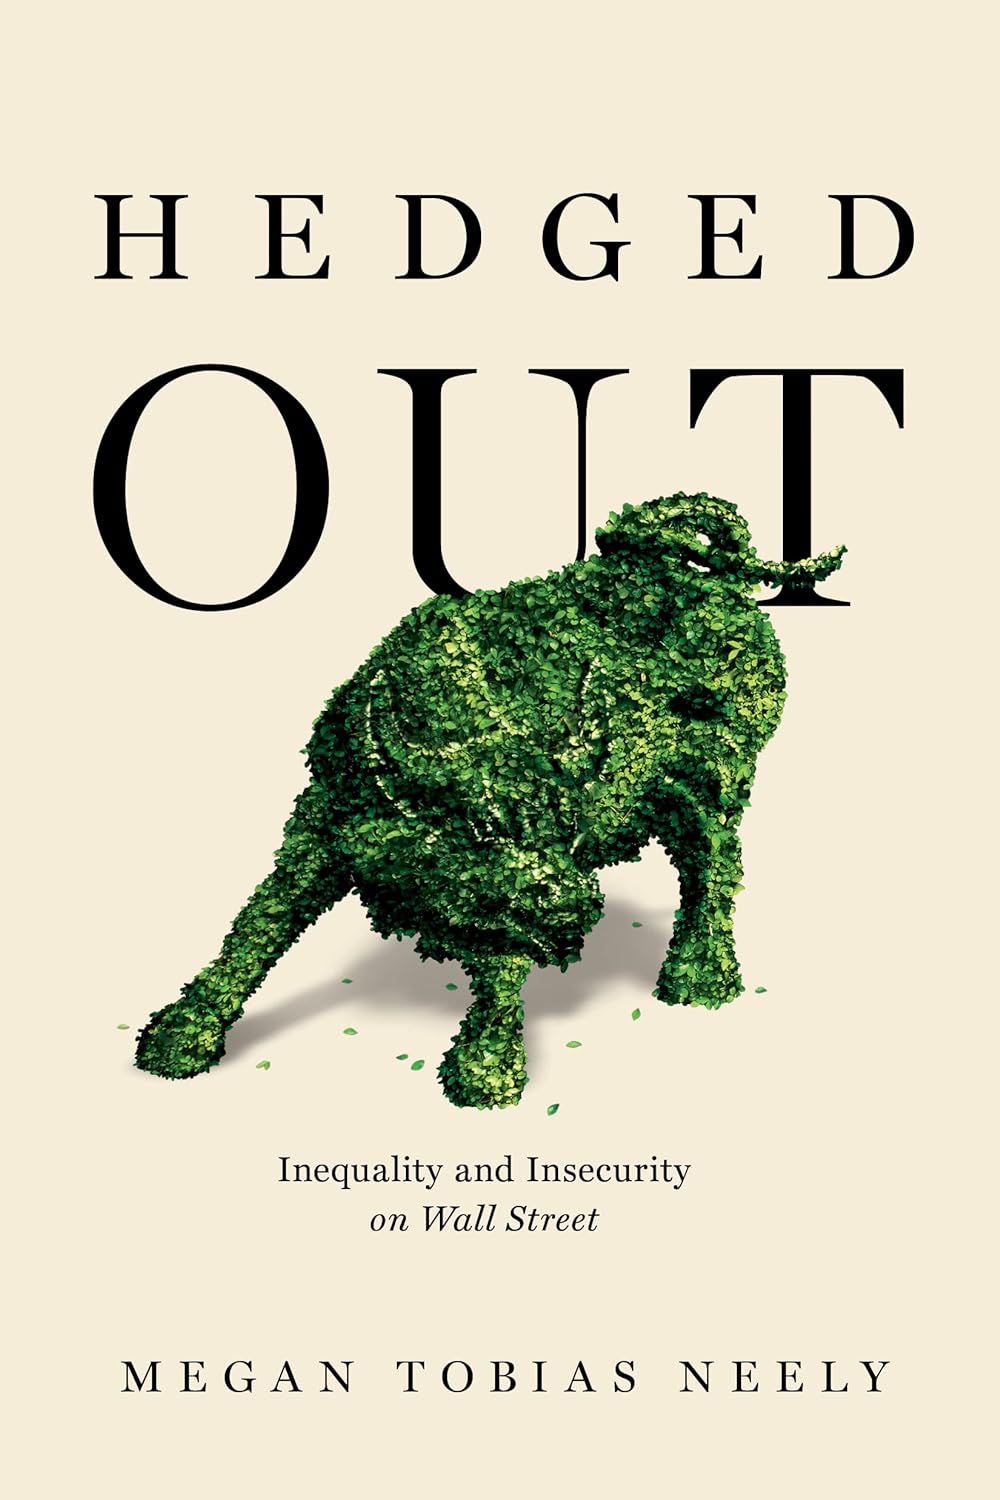 Megan Tobias Neely: Hedged Out (2022, University of California Press)